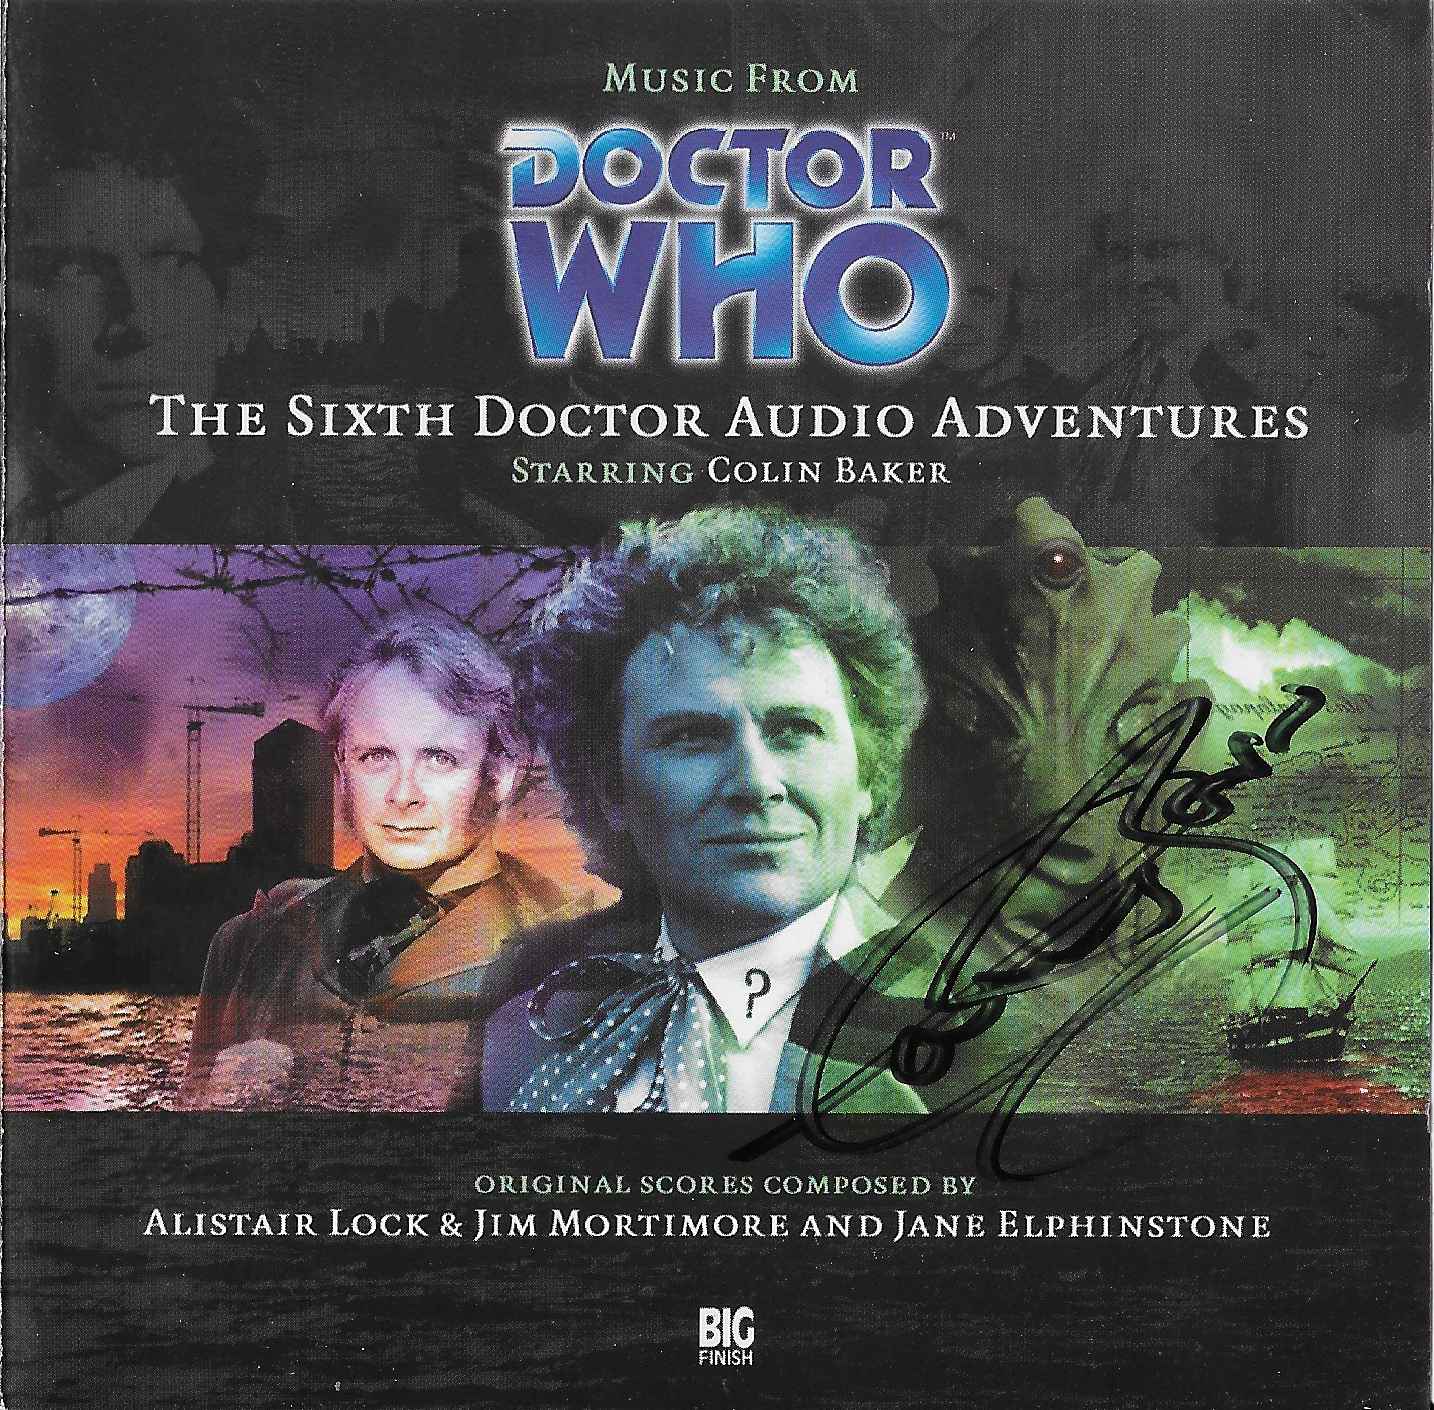 Picture of Doctor Who - The sixth Doctor audio adventures by artist Alistair Lock / Jim Mortimore / Jane Elphinstone from the BBC cds - Records and Tapes library